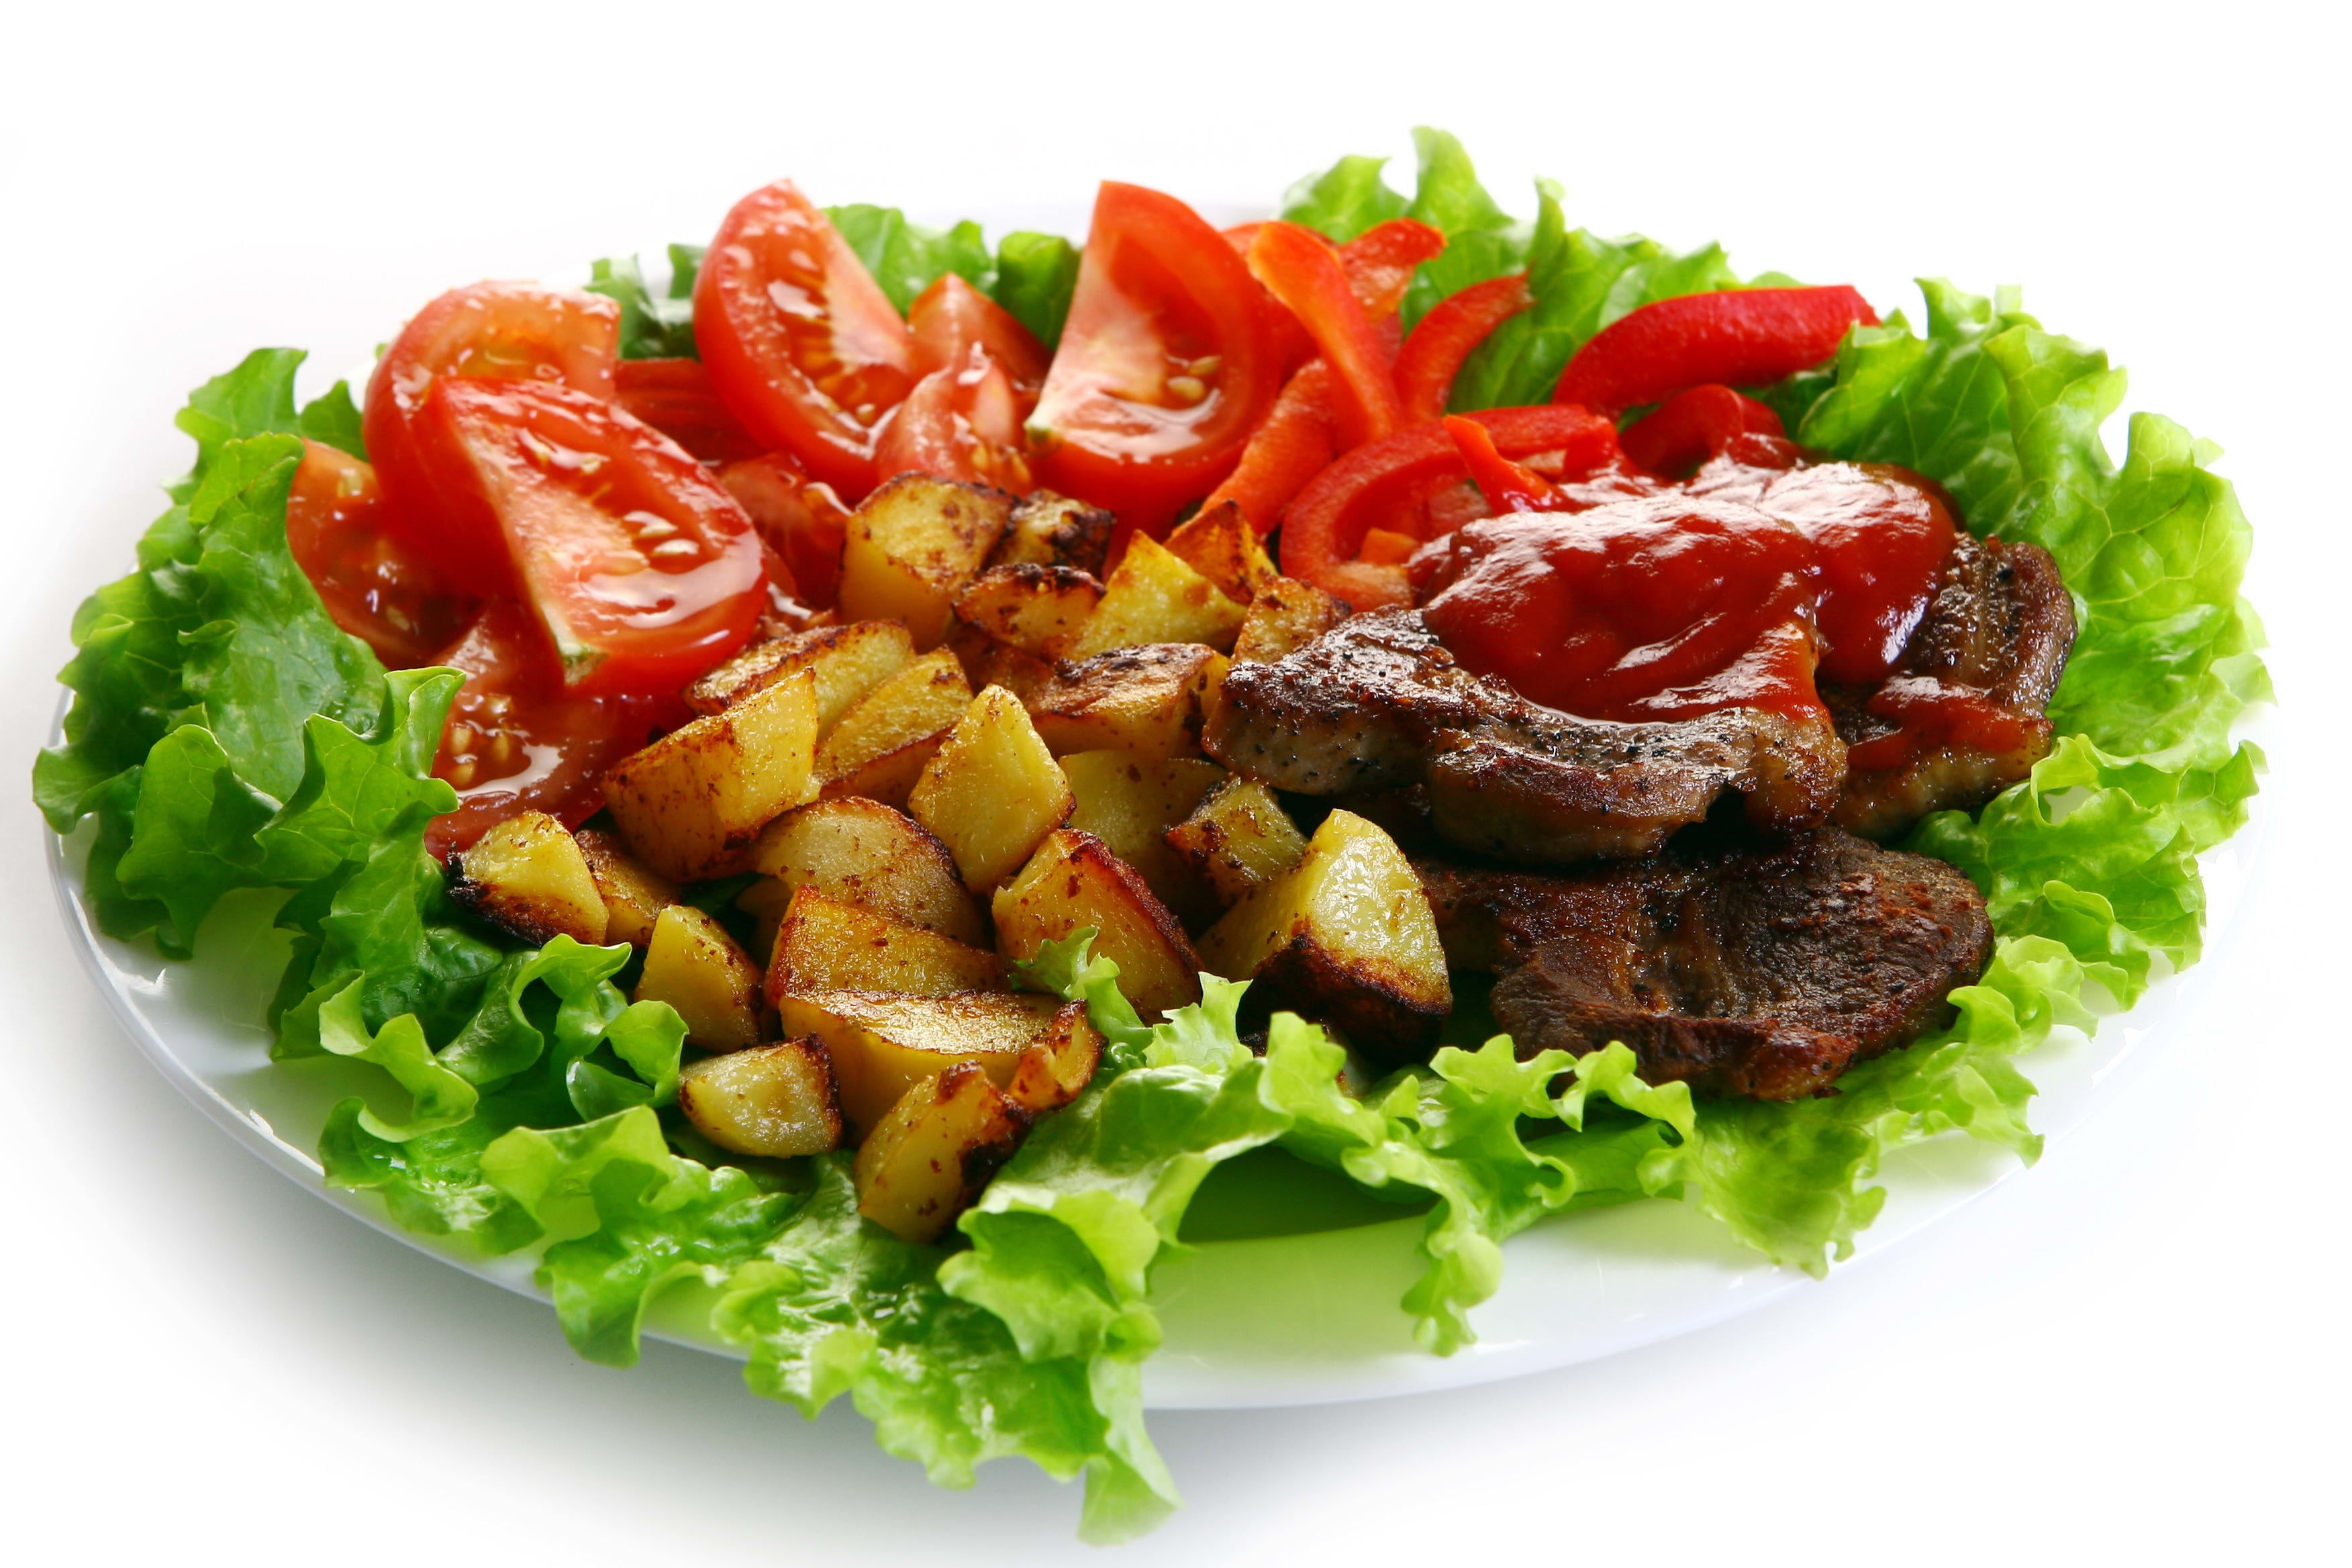 meat dish, ketchup, potatoes, tomatoes, lettuce, plate, cabbage